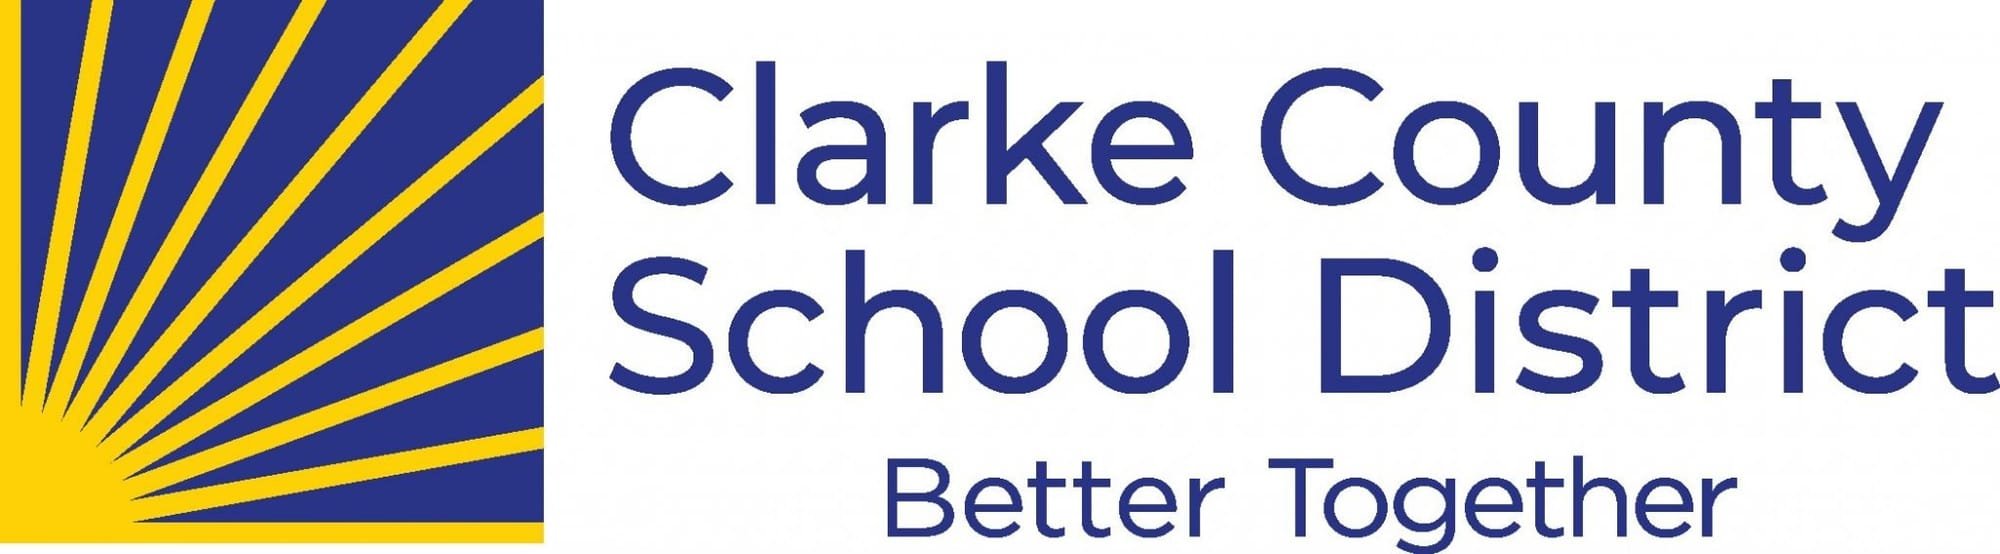 THANK YOU CLARKE-COUNTY SCHOOL DISTRICT!